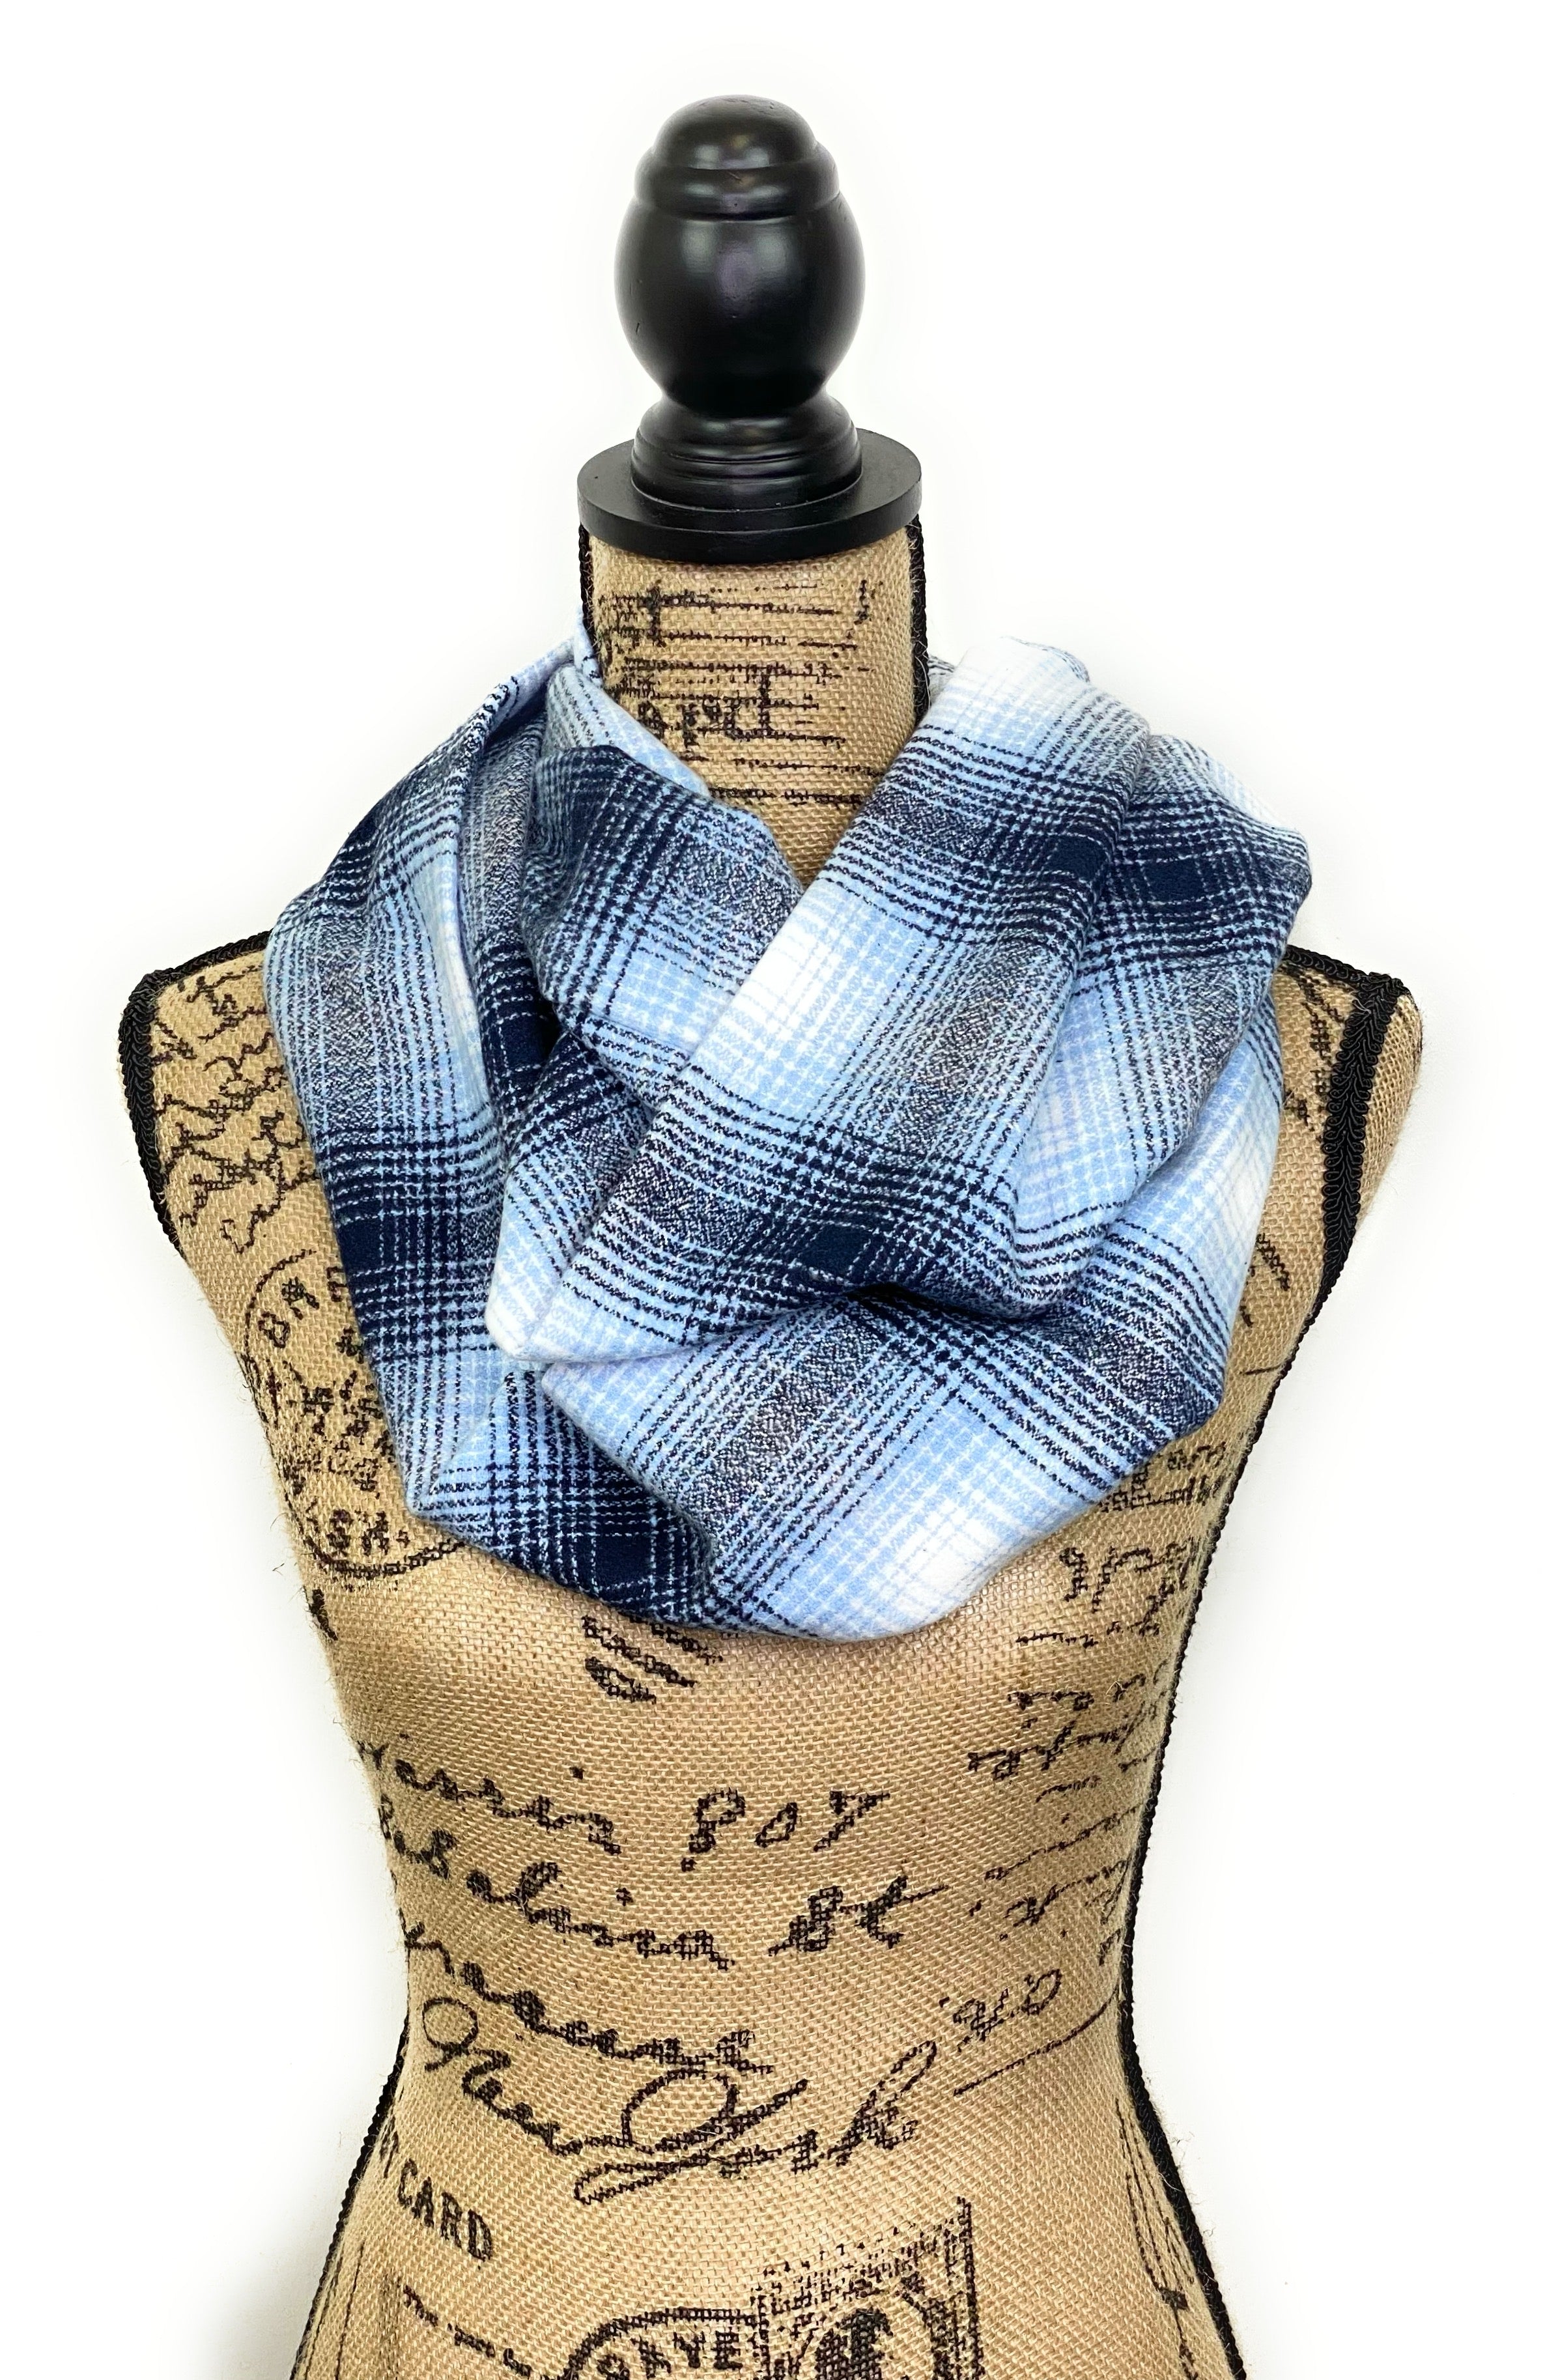 Navy Blue, Light Blue, and White Ombre Plaid Flannel Infinity or Blanket Scarf